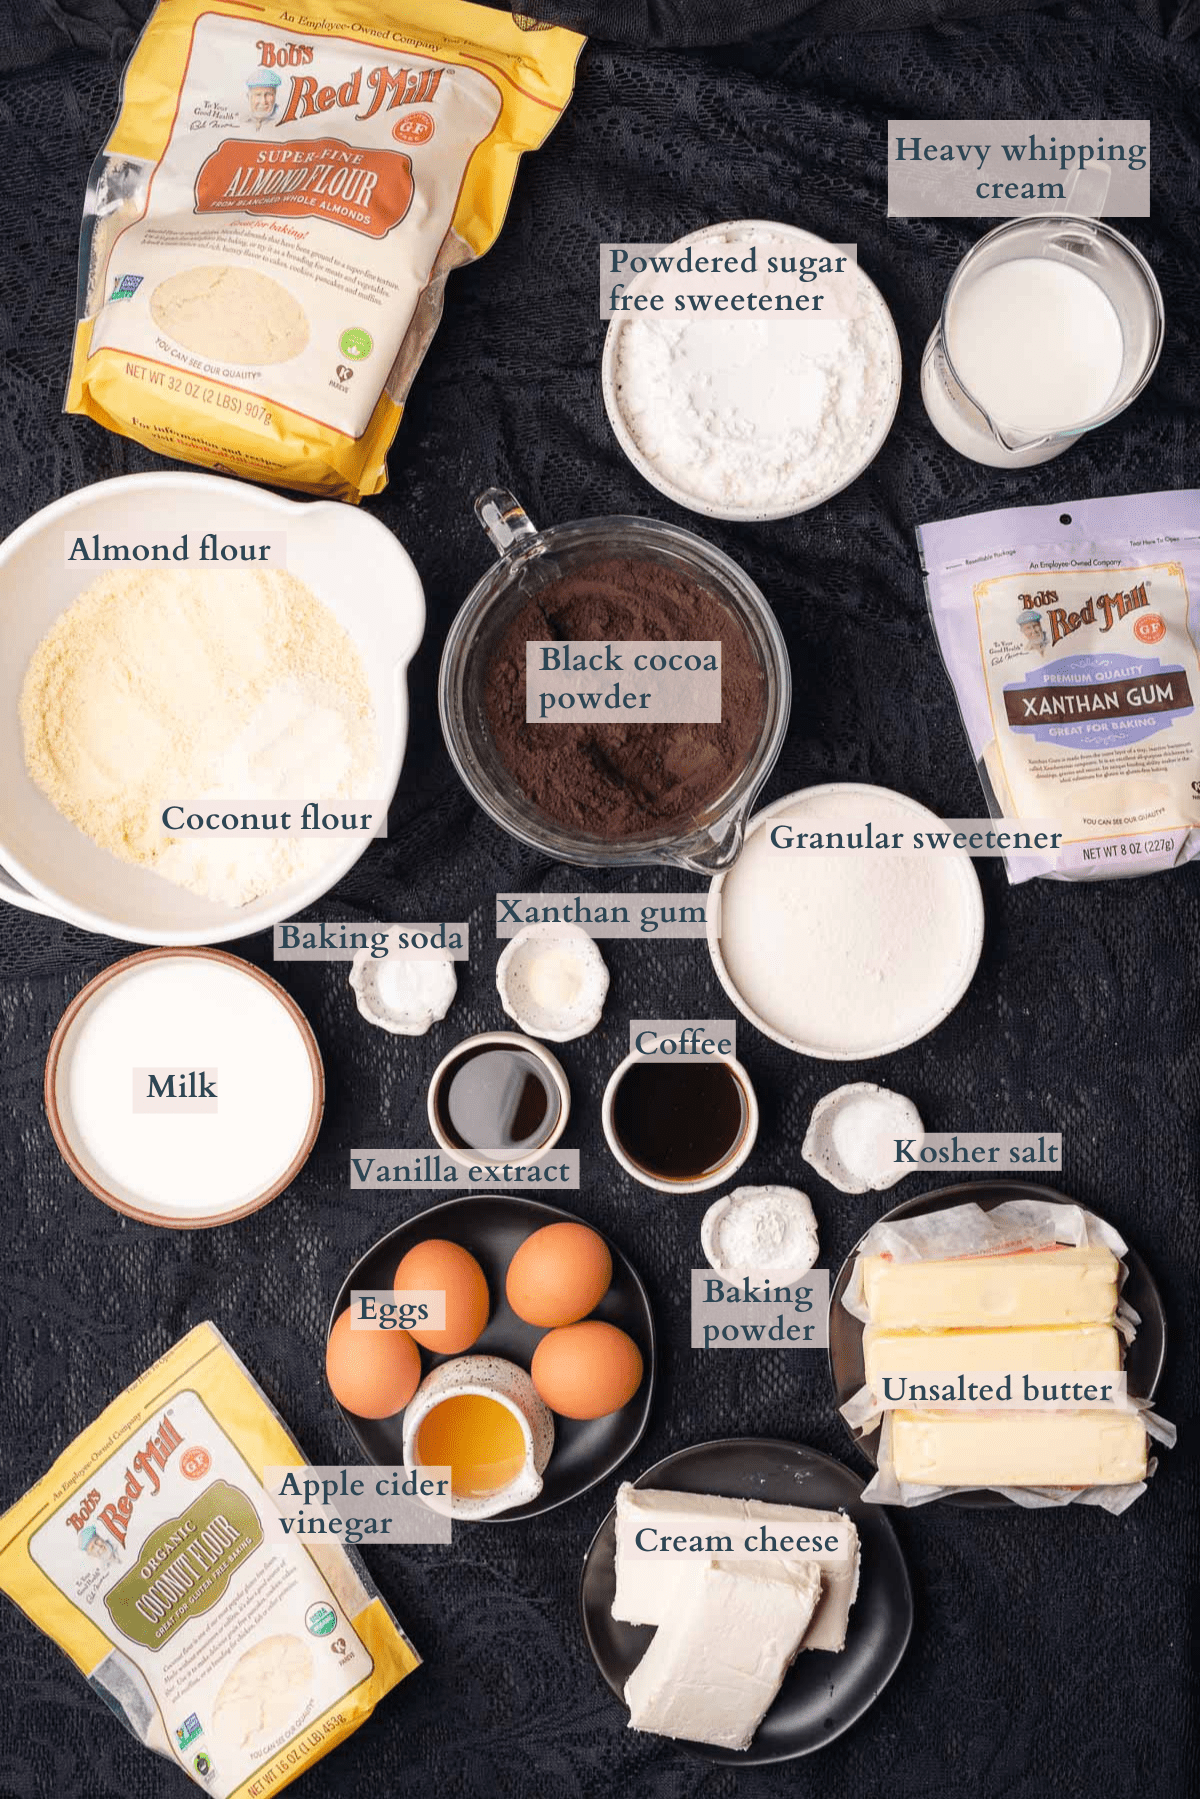 black velvet cake ingredients with text to denote different ingredients